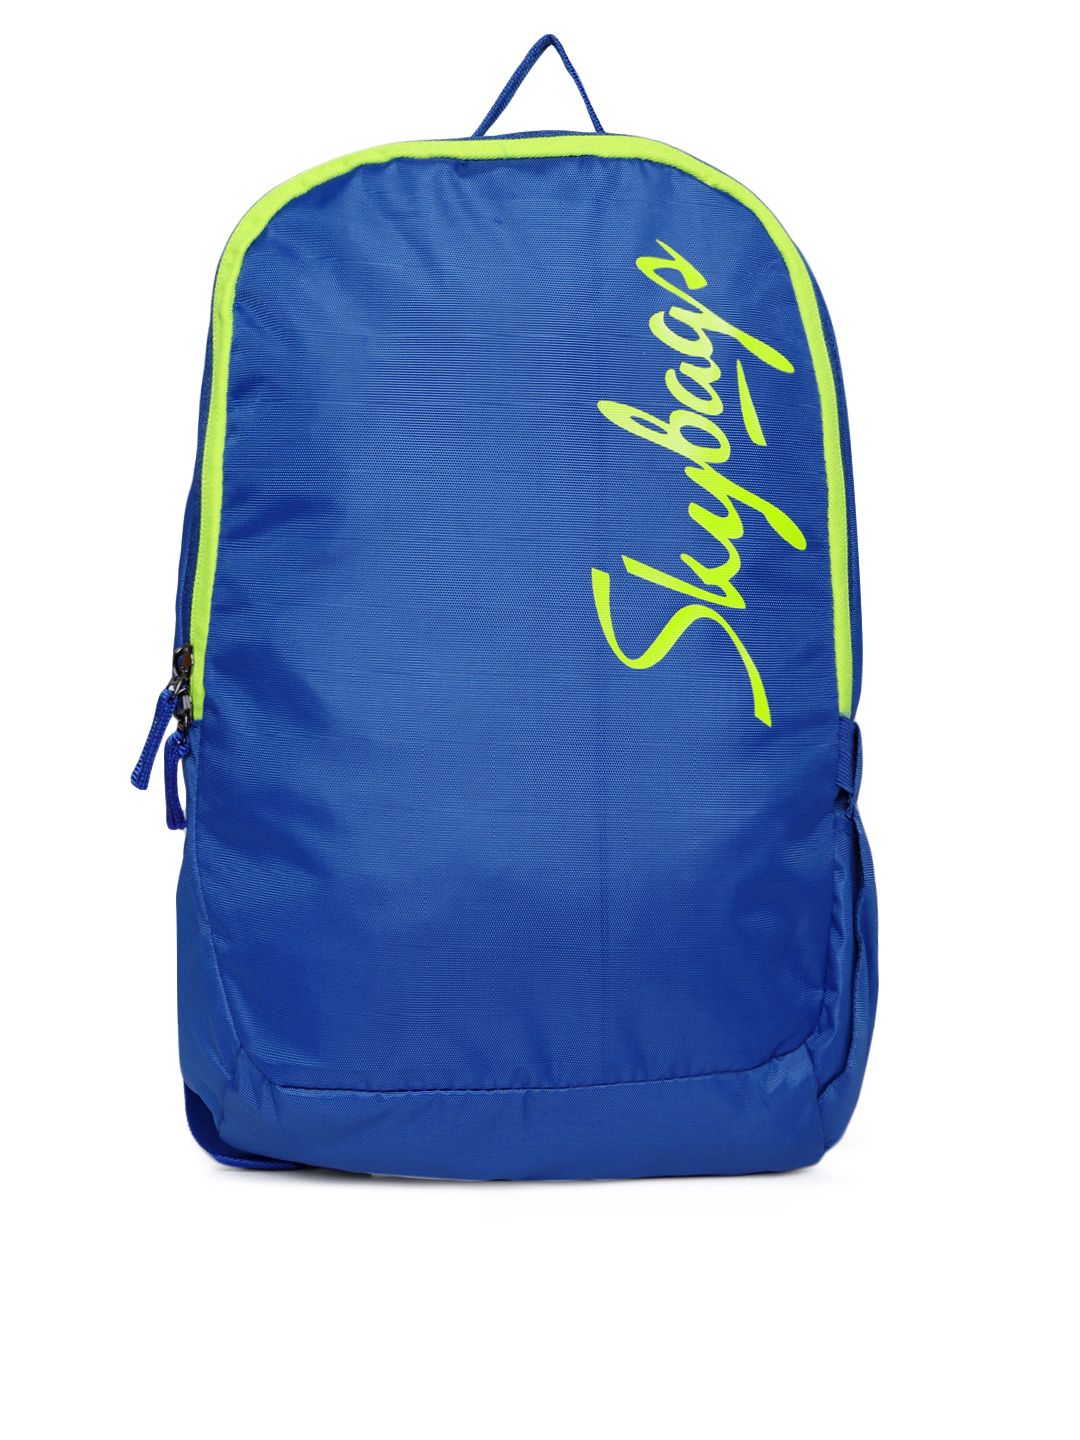 Skybags Unisex Blue Brand Logo Backpack Price in India